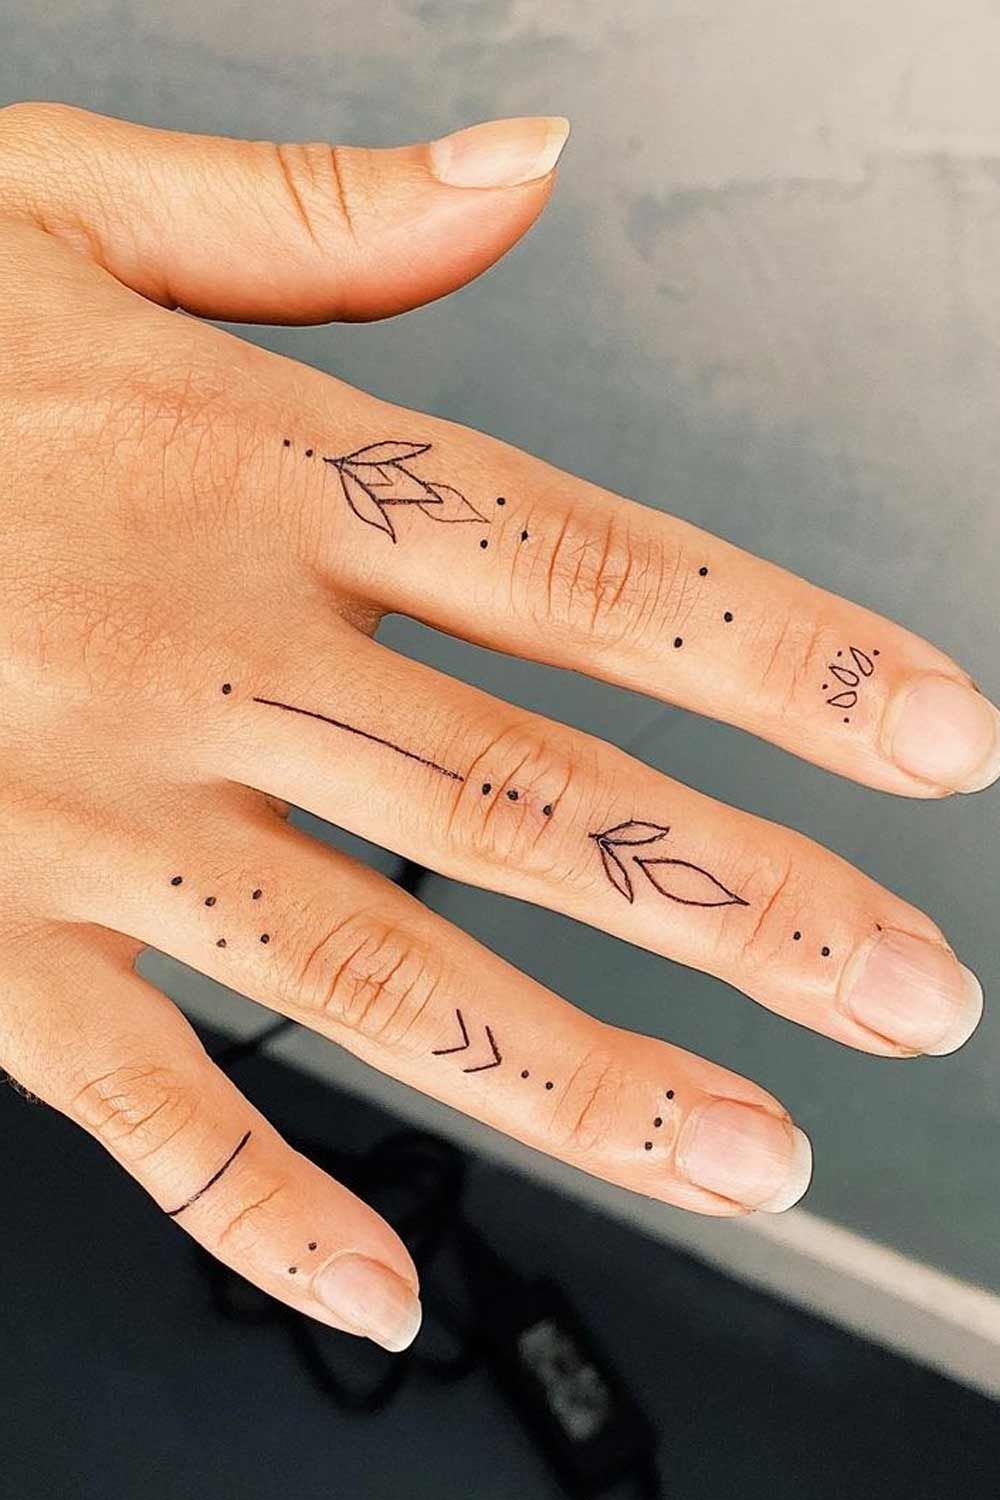 Inspirational Finger Tattoo Ideas for
Your Next Ink